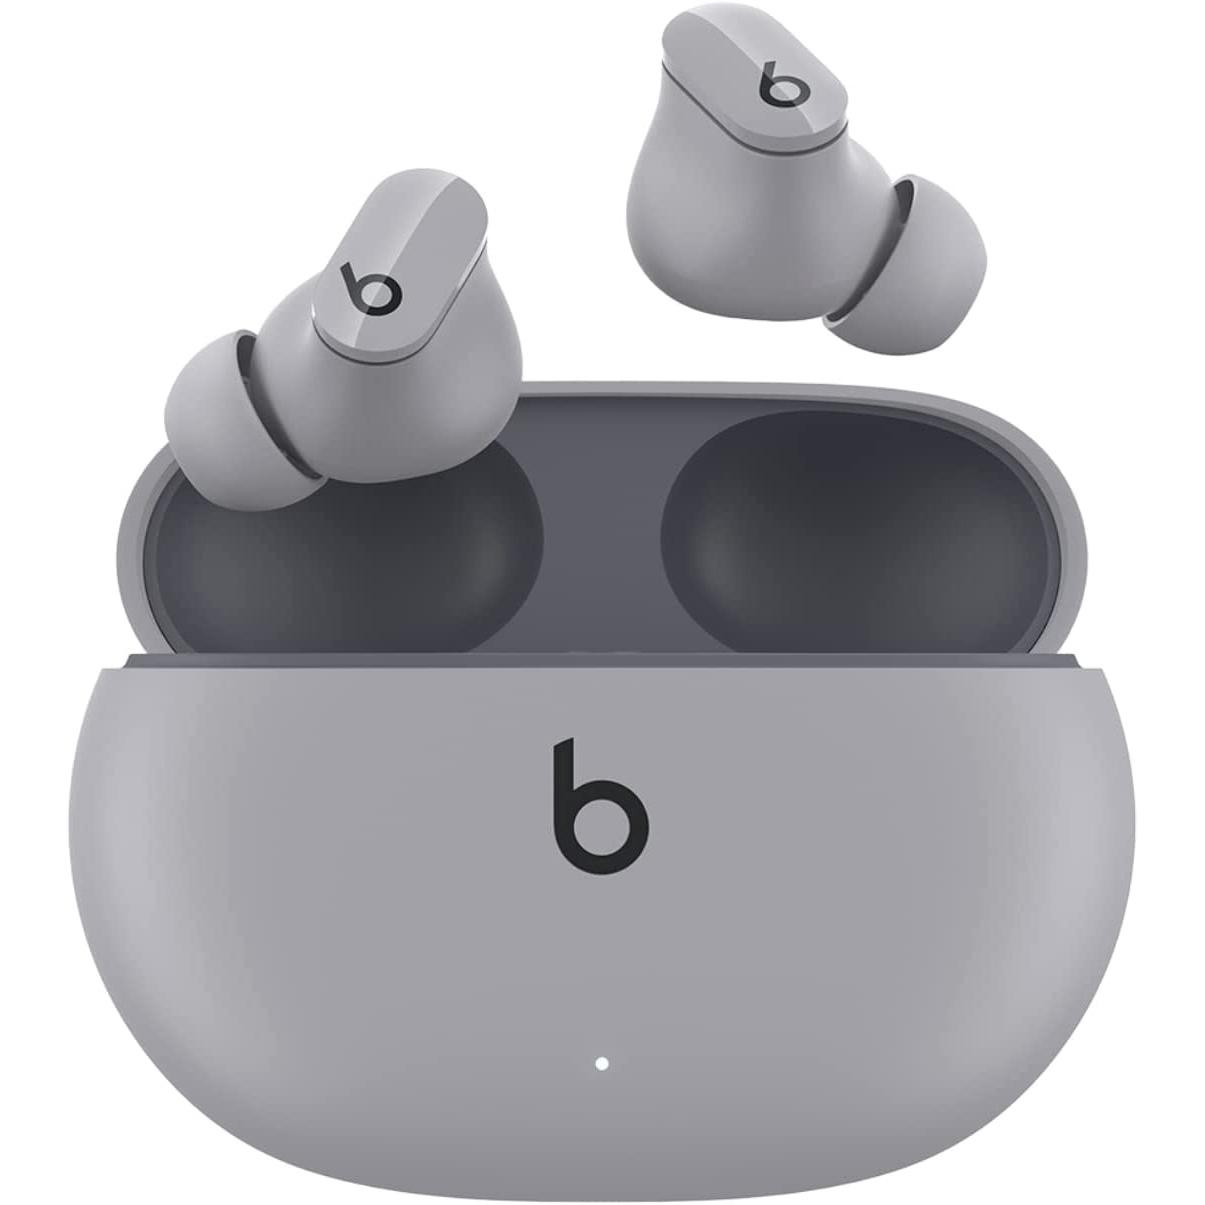 Beats Studio Buds True Wireless Noise Cancelling Earbuds for $114.95 Shipped